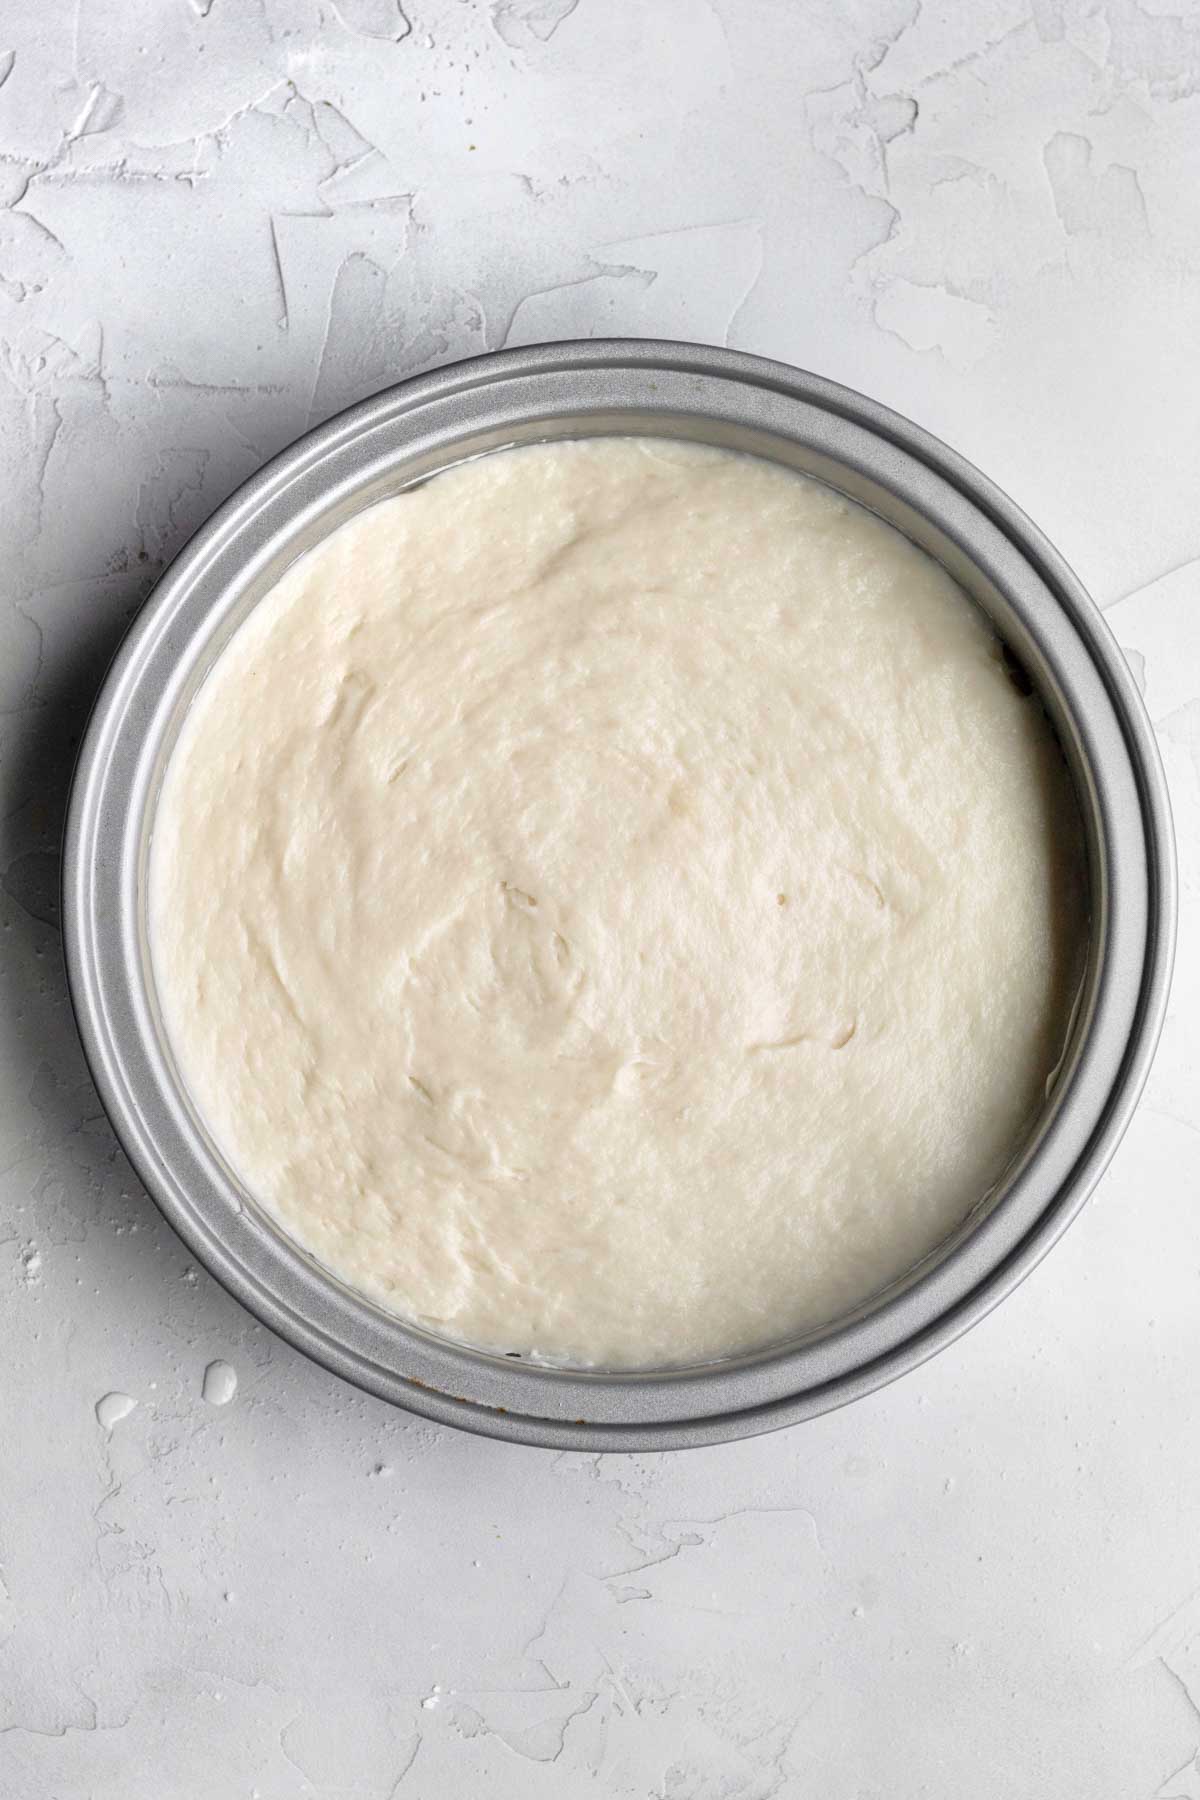 Filling a silver cake pan with the batter.